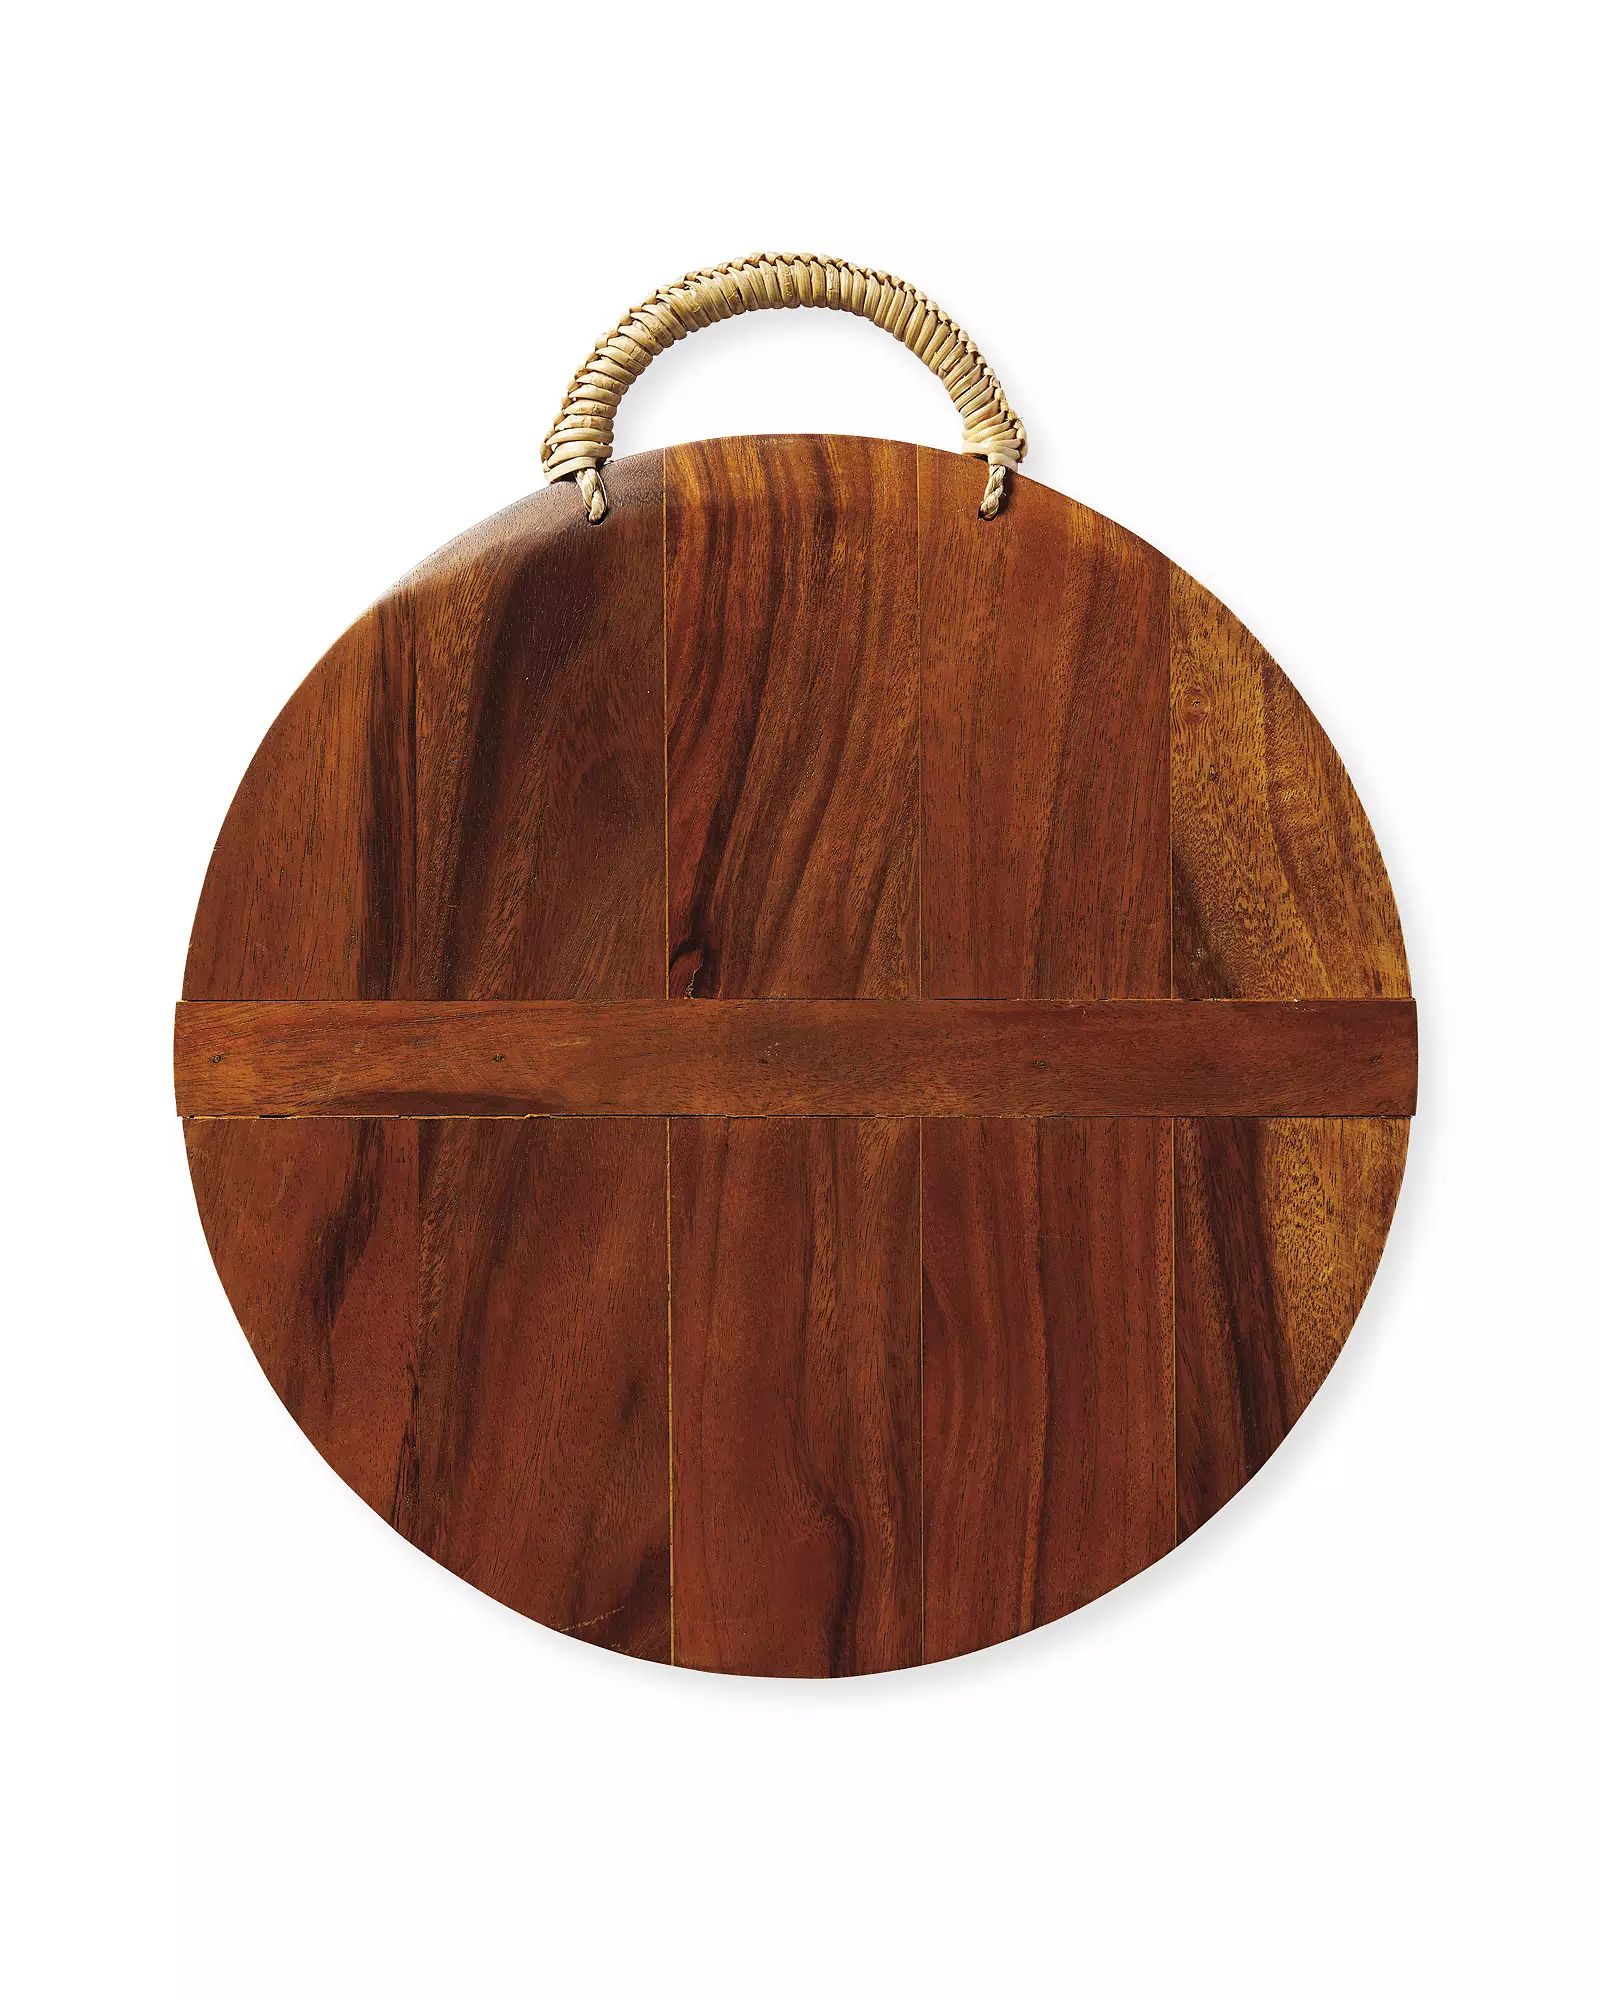 Rhinebeck Serving Board | Serena and Lily